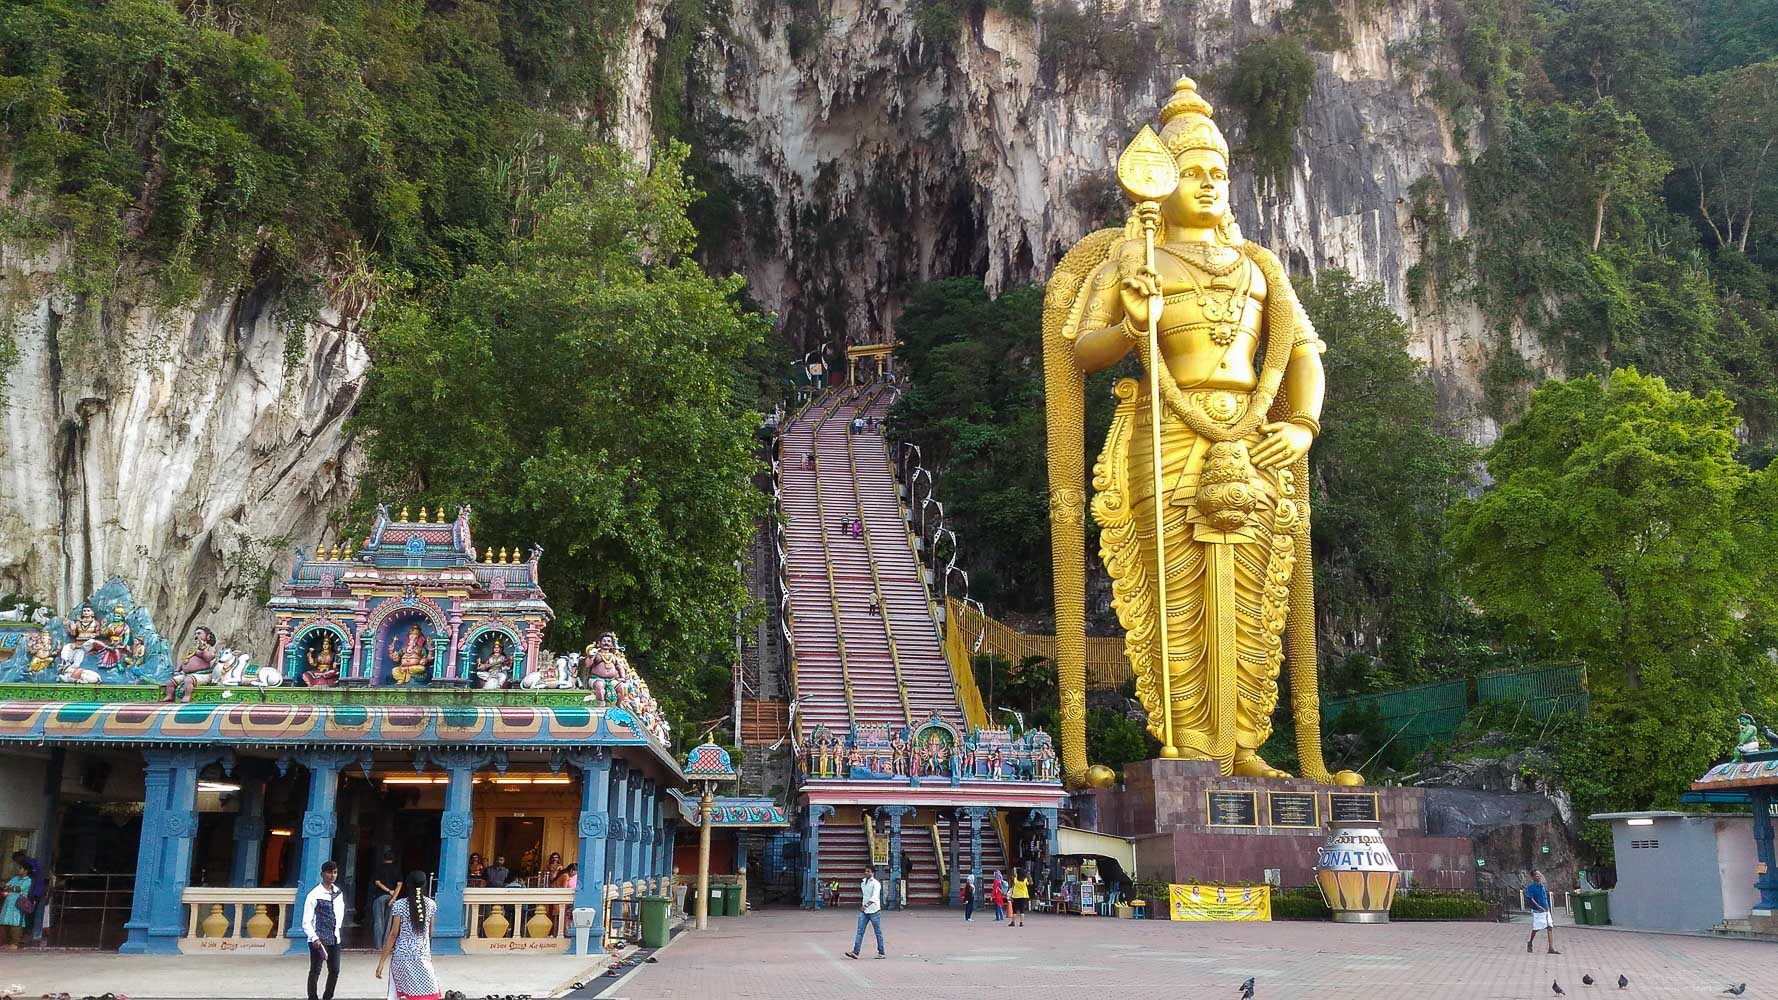 A large Murugan statue will greet you at the entrance of Batu caves 